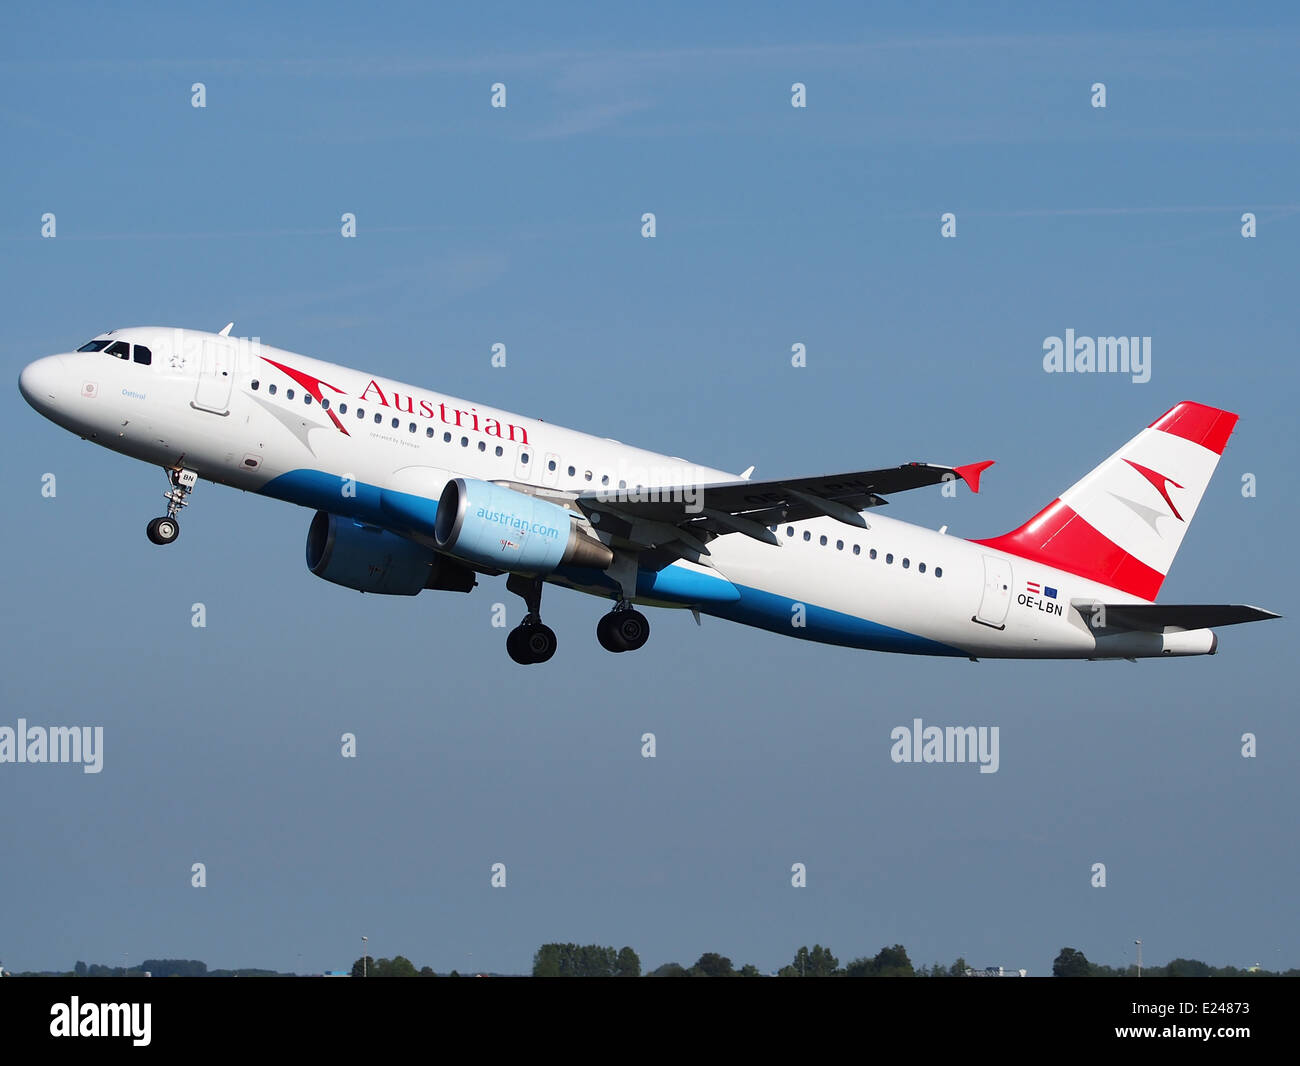 OE-LBN Austrian Airlines Airbus A320-214 - cn 768 takeoff from Schiphol (AMS - EHAM), The Netherlands, 16may2014, pic-2 Stock Photo